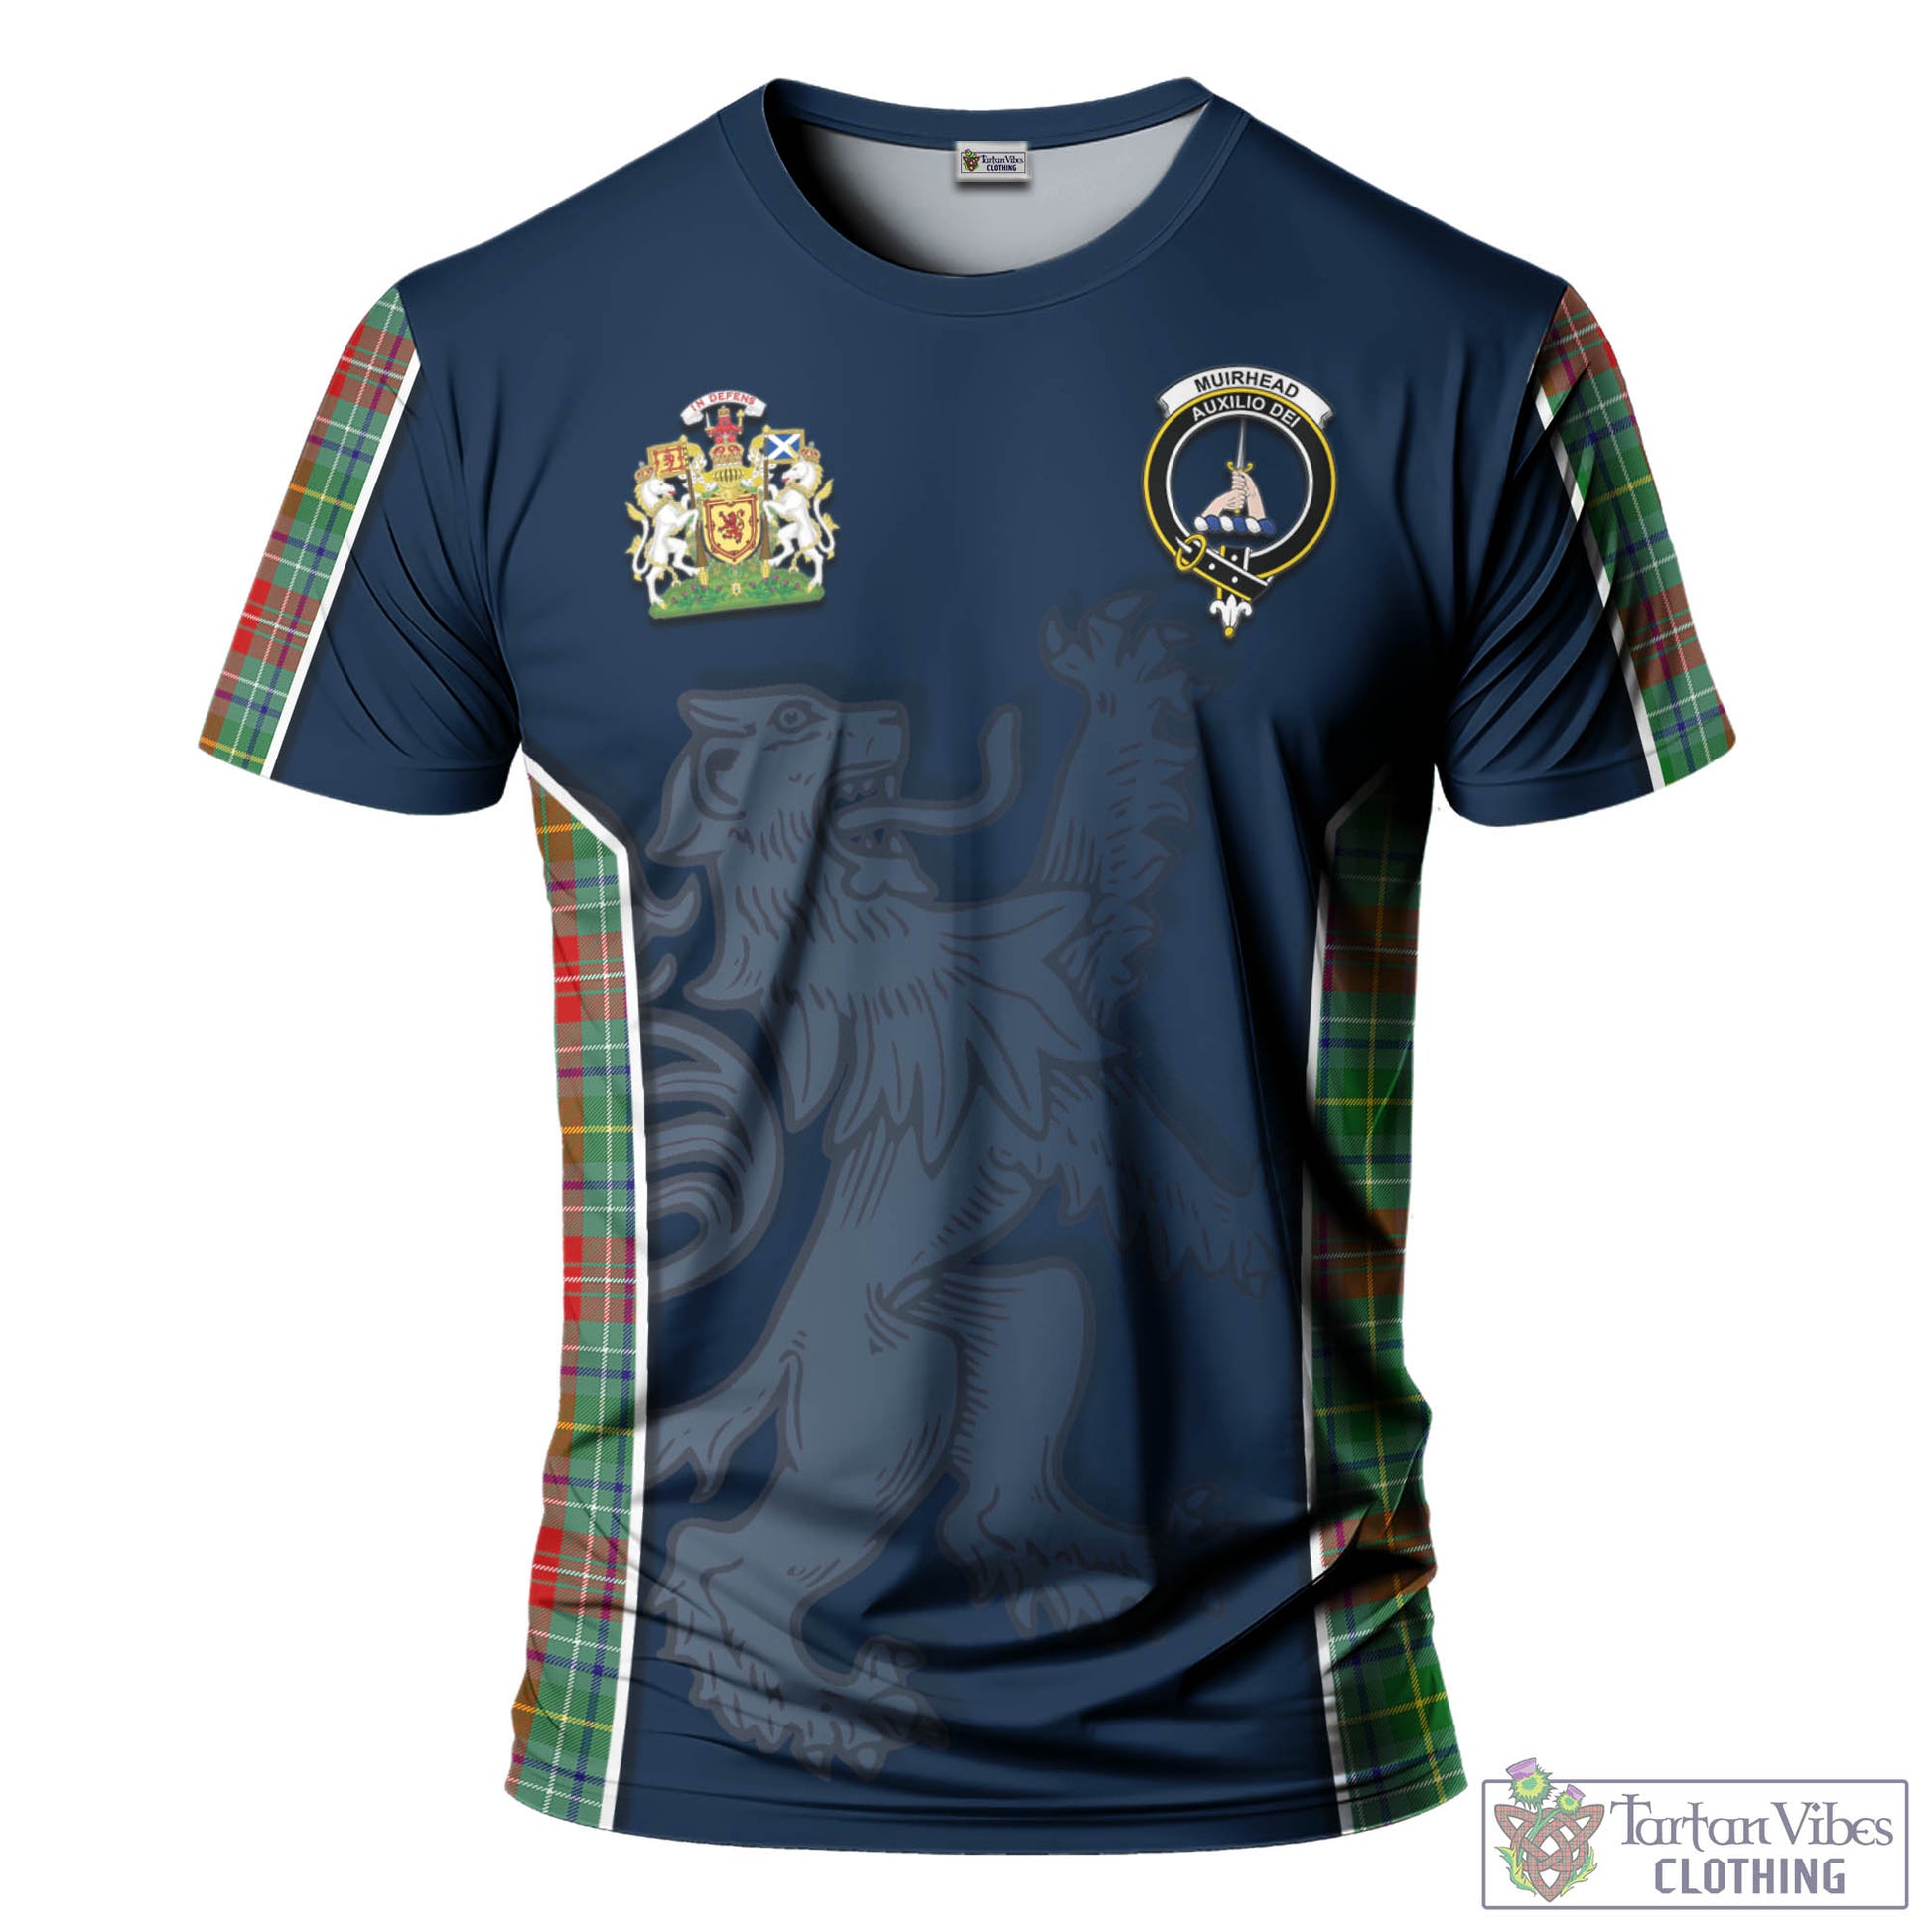 Tartan Vibes Clothing Muirhead Tartan T-Shirt with Family Crest and Lion Rampant Vibes Sport Style